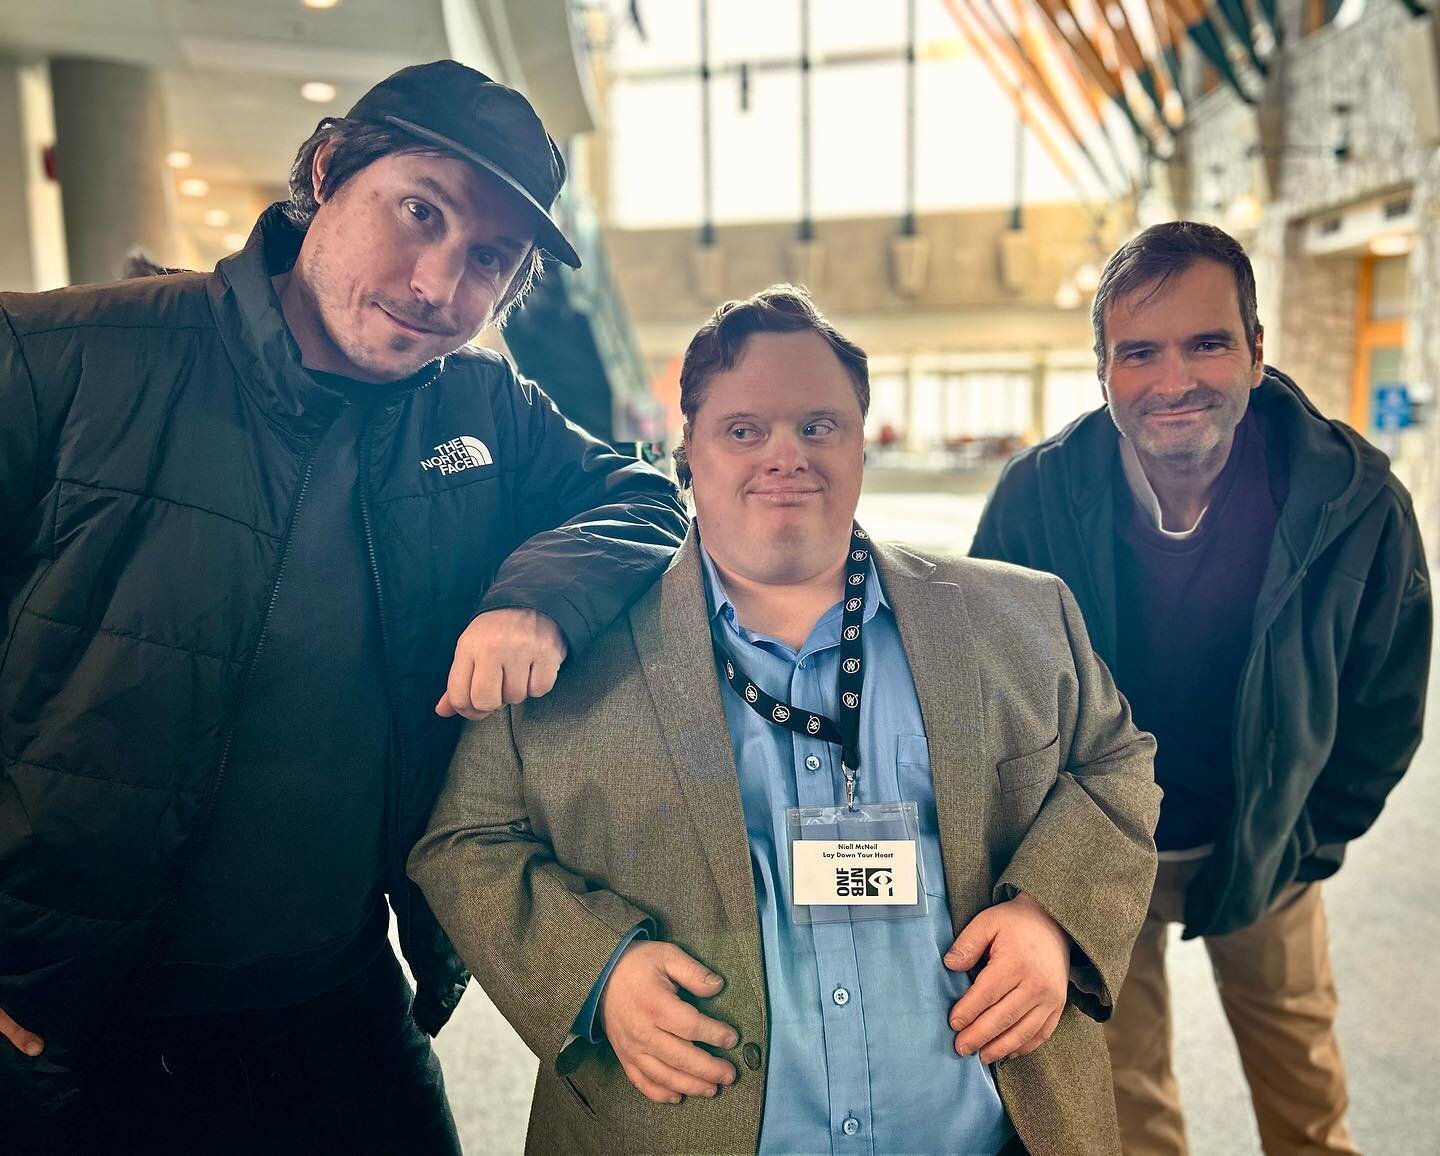 Chilling with my man Niall McNeil and @faulknerinvert at the Down Syndrome Film Festival. Niall was the star of our documentary film Lay Down Your Heart and it was great seeing the movie on the big screen together. Him and I are currently working on 